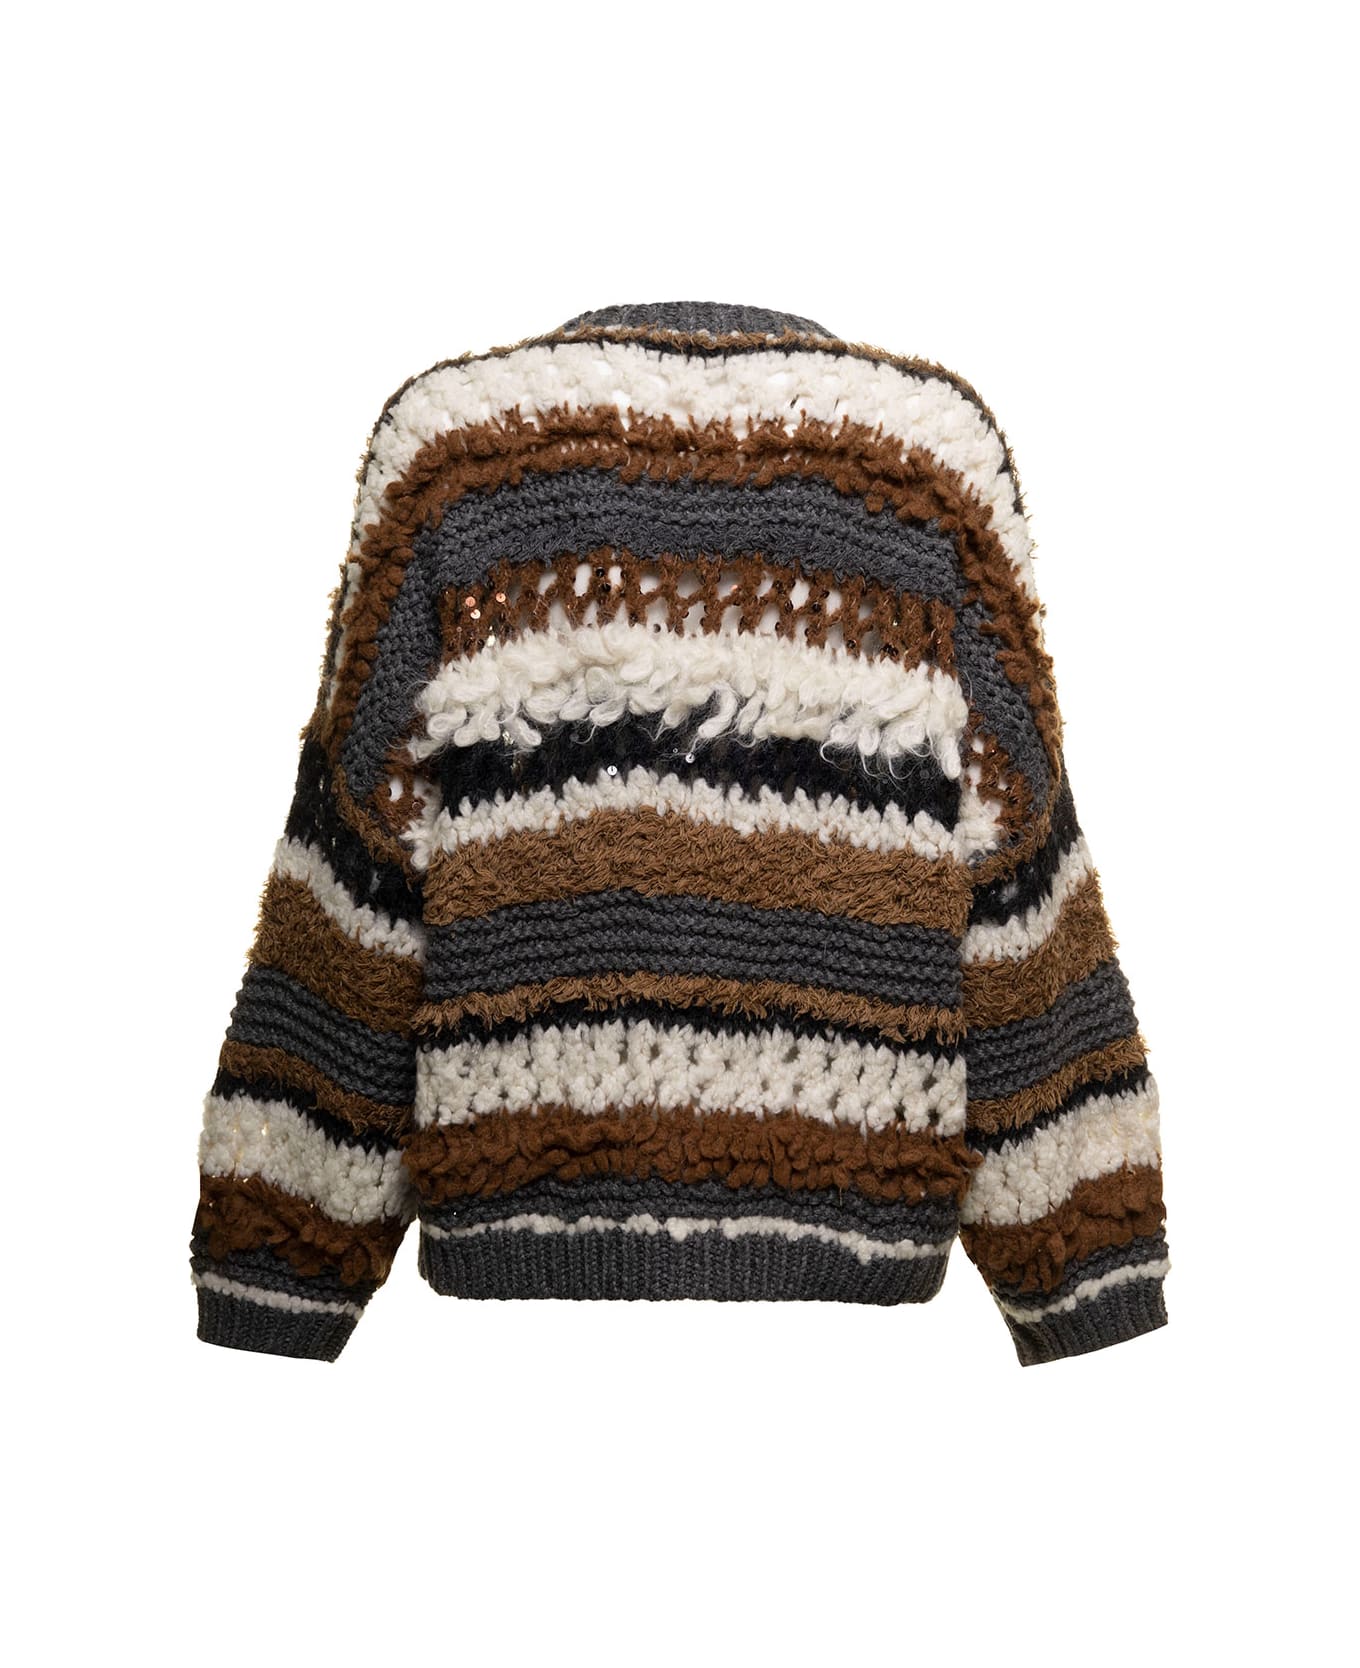 Brunello Cucinelli Handmade Cashmere Sweater With Stripes And Sequins Brunello Cucinelli Woman - Brown